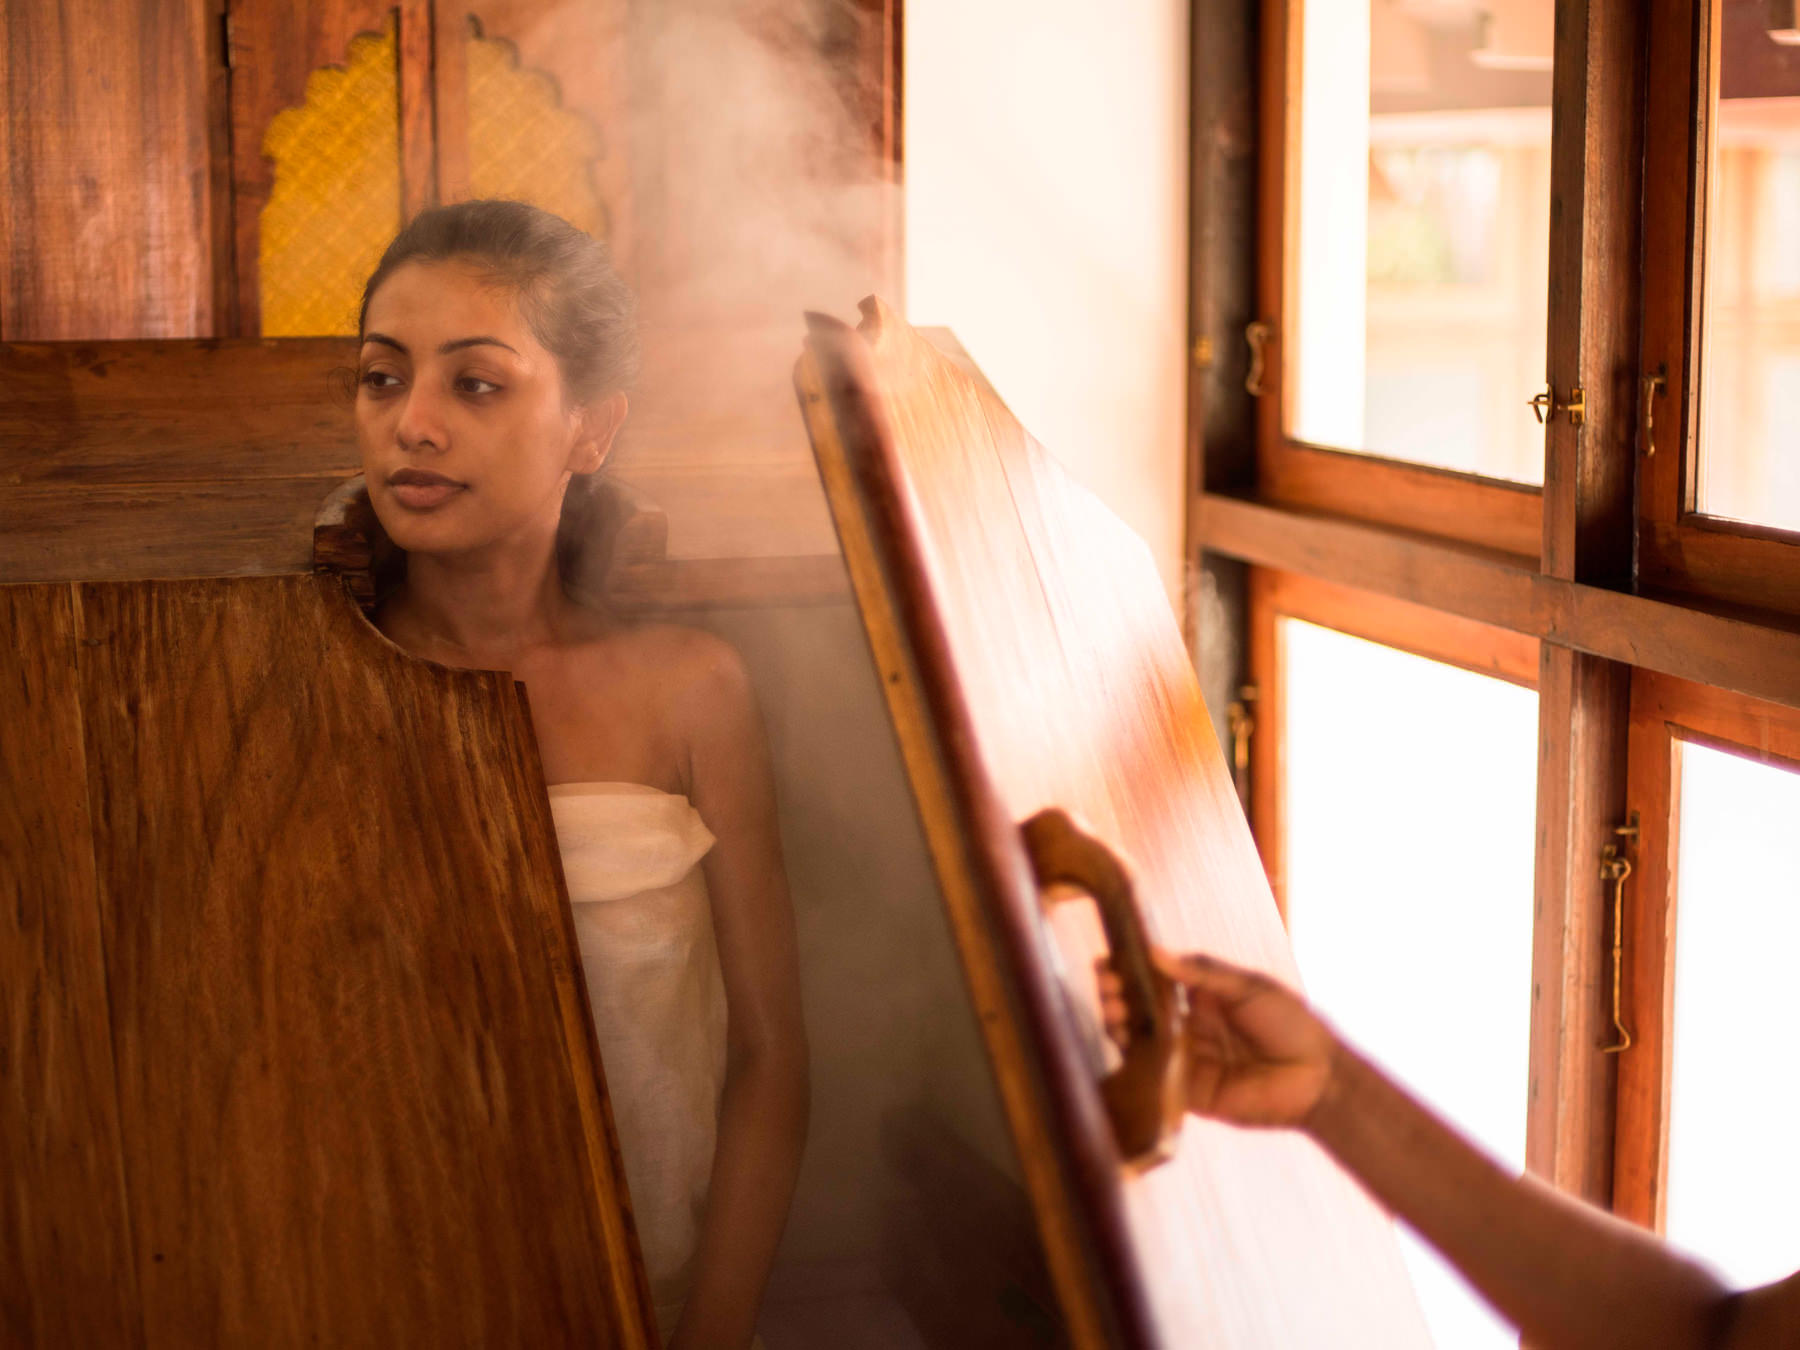 Ayurveda steam bath treatment to remove excess toxins from the body through sweating